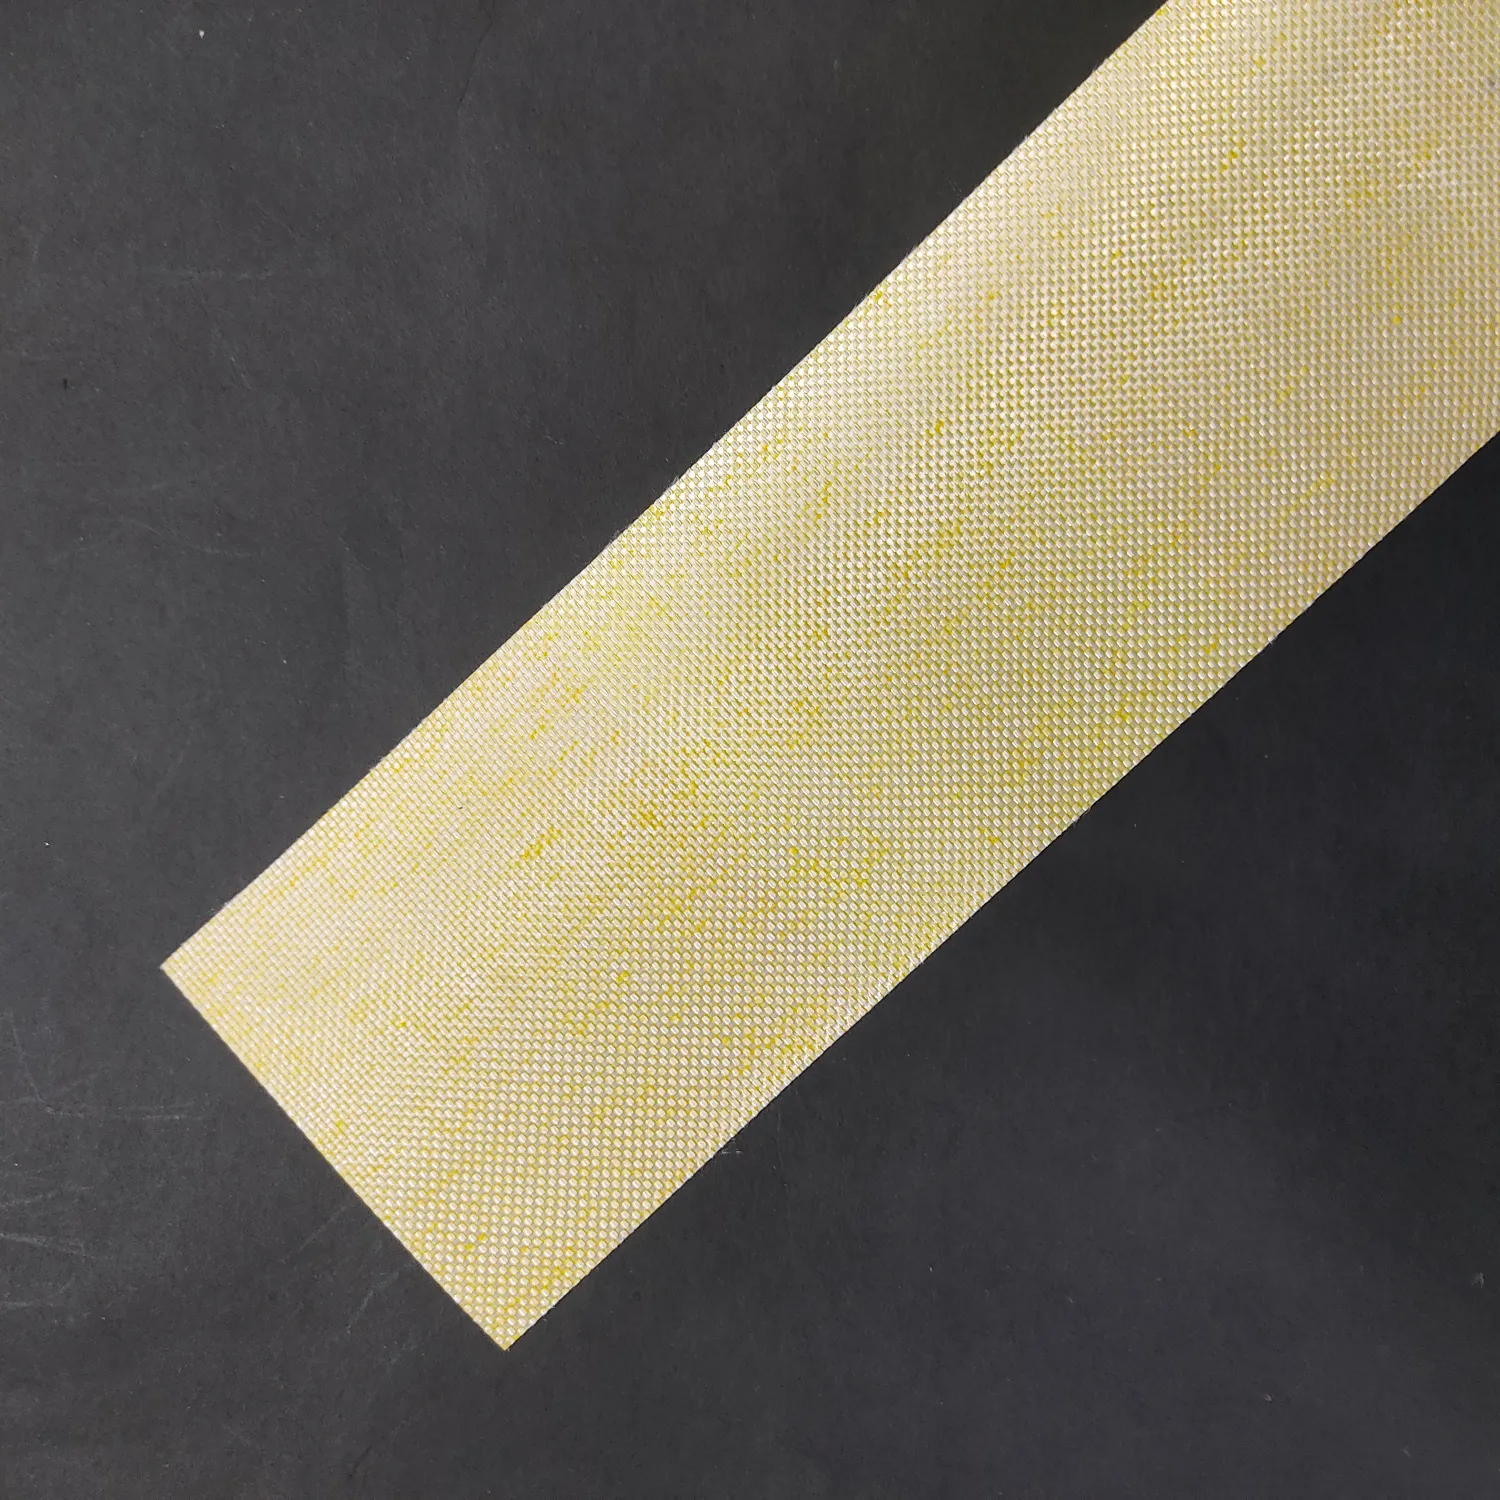 CSC PVC Fabric back yellow, red